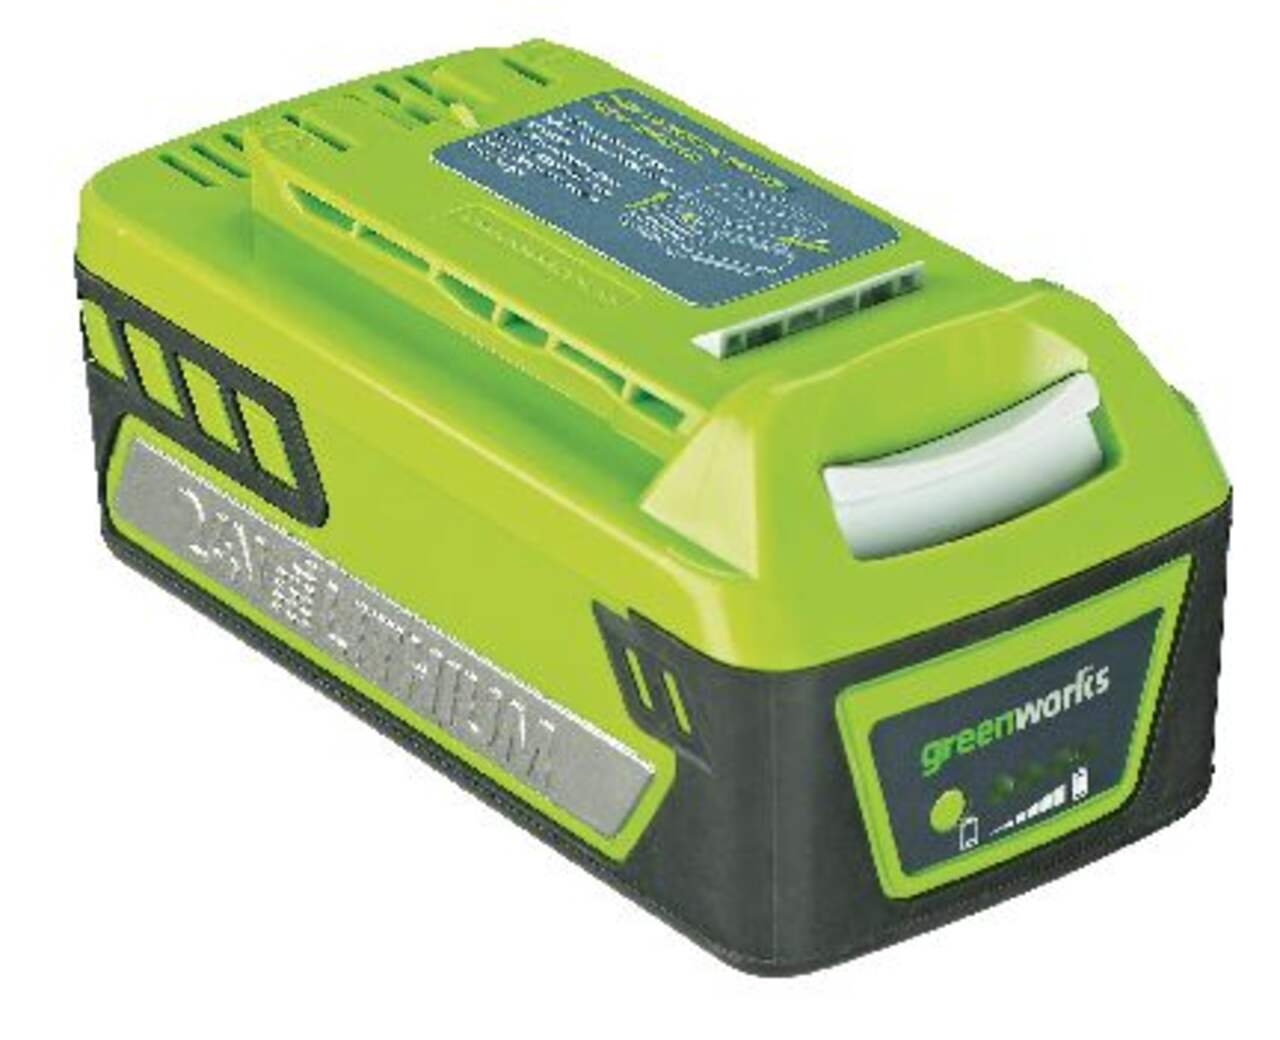 Greenworks 24V Hot Glue Gun with 24V 2AH Battery and 2A Charger